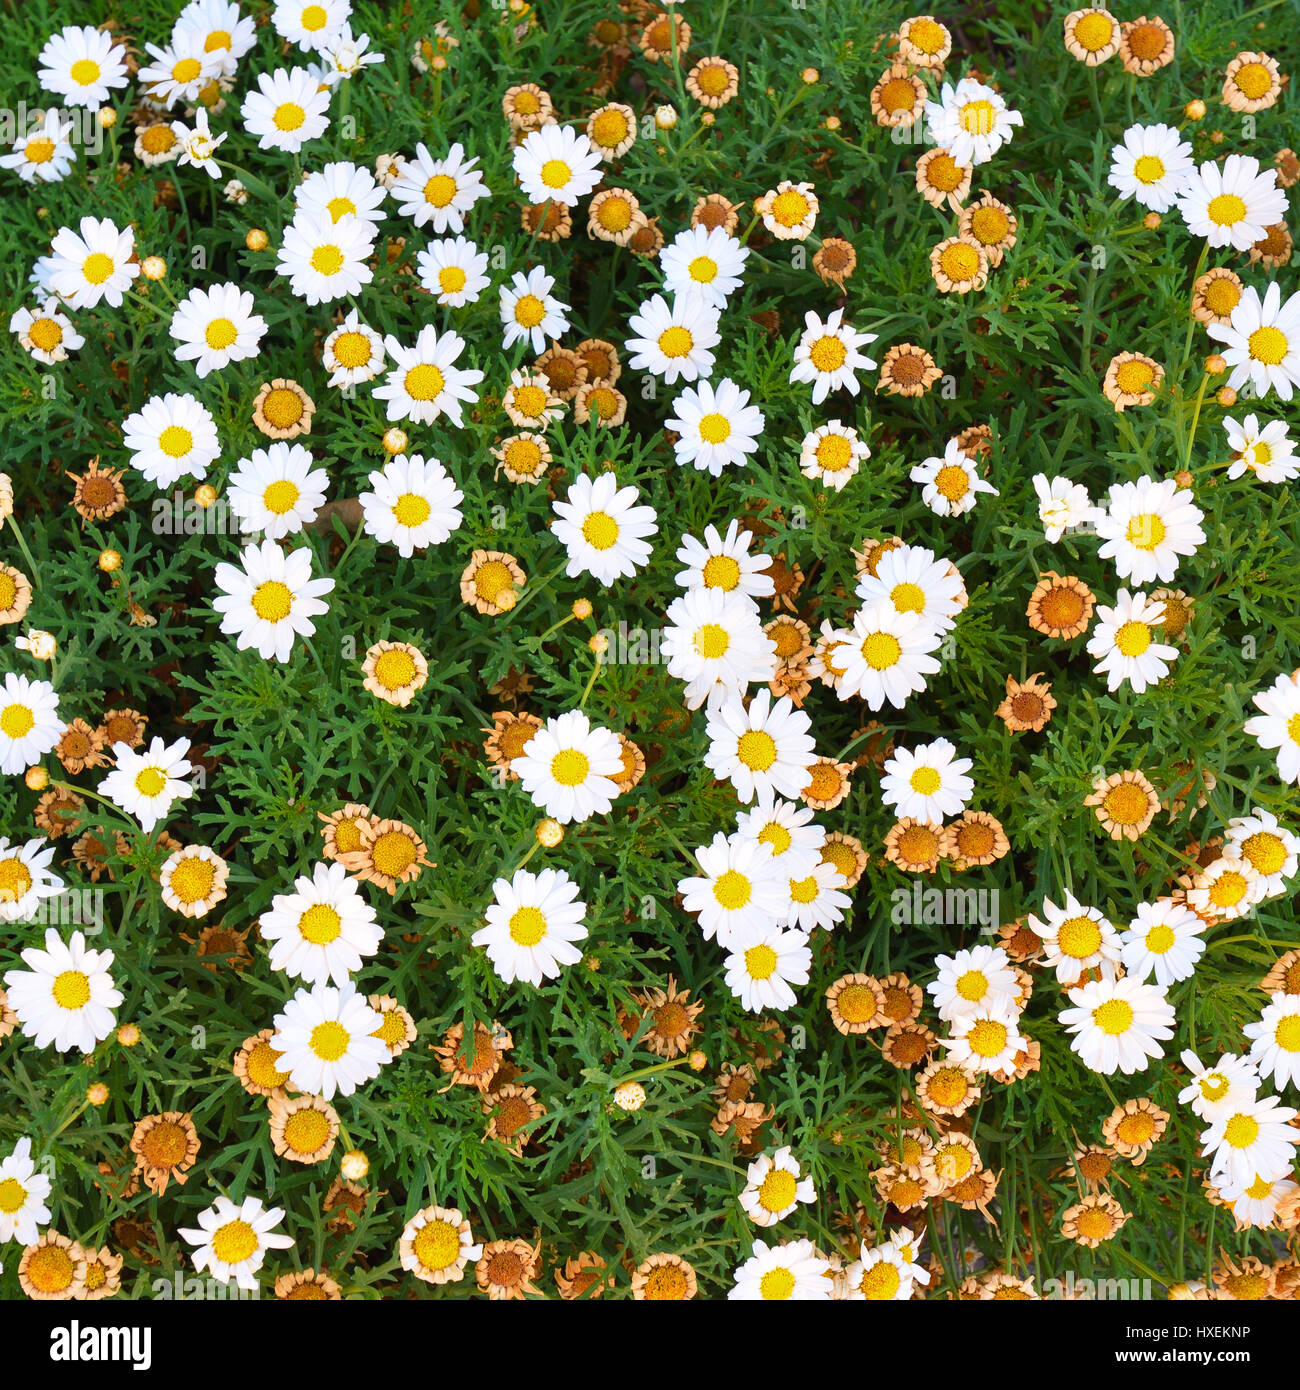 New daisy flower blossoms and old and withered daisy blossoms Stock Photo